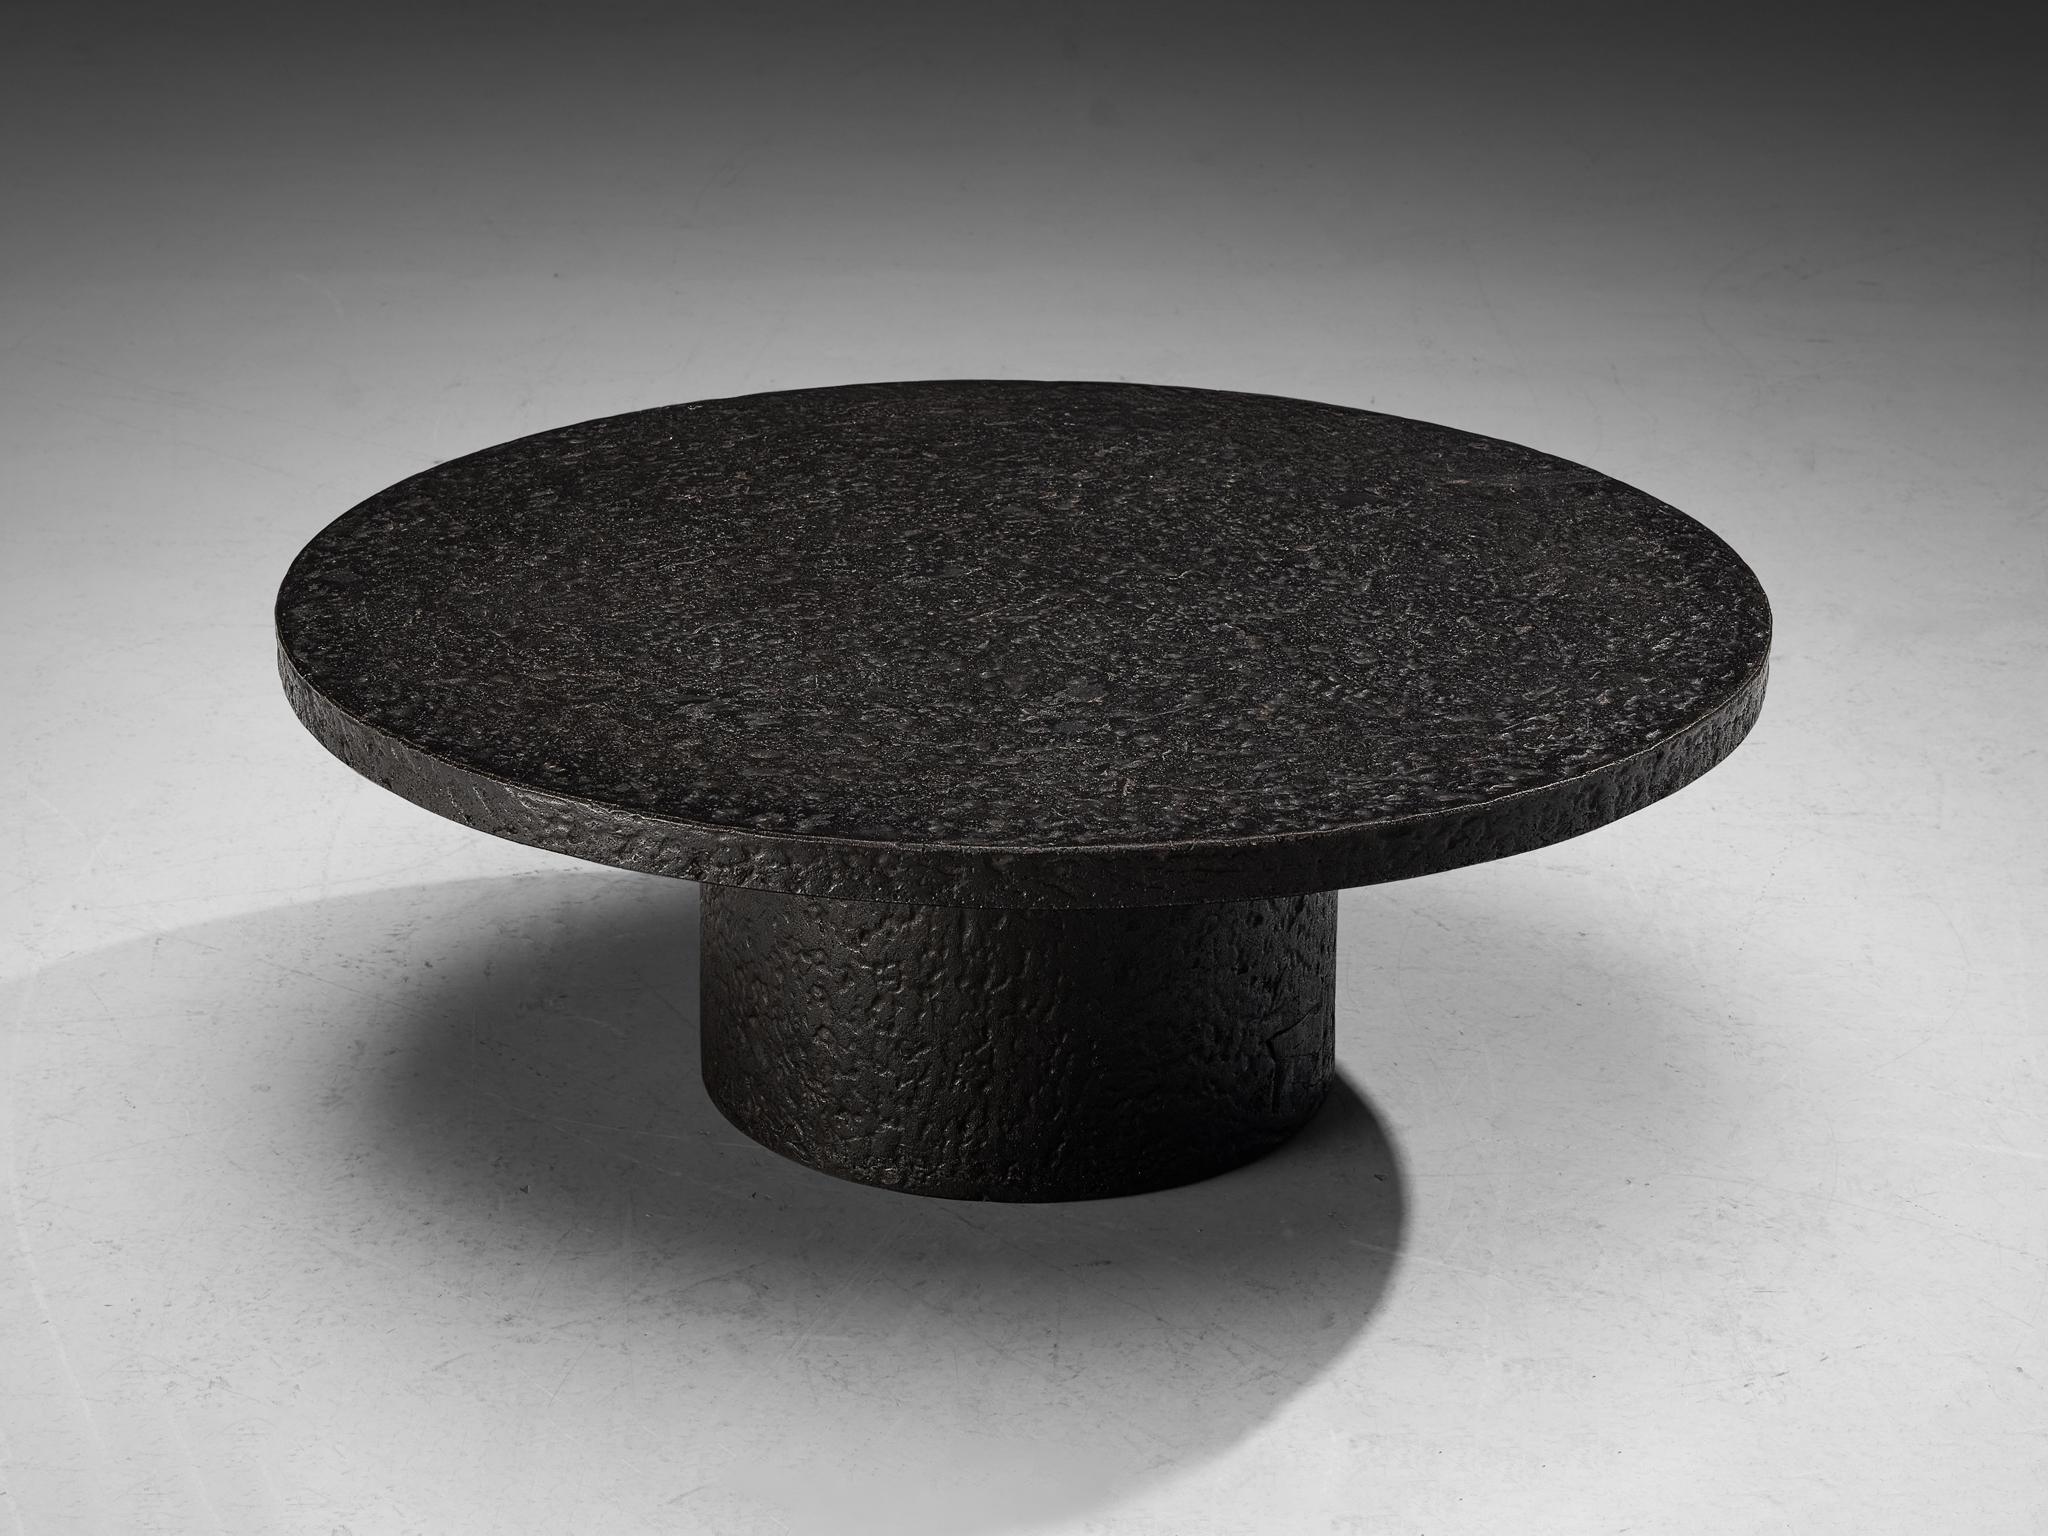 Cocktail table, resin, Northern-Europe, 1970s.

This deep black robust coffee or cocktail table is from the 1970s. The thick round top is supported by a similar but smaller round column. The whole construction is executed in resin which resembles